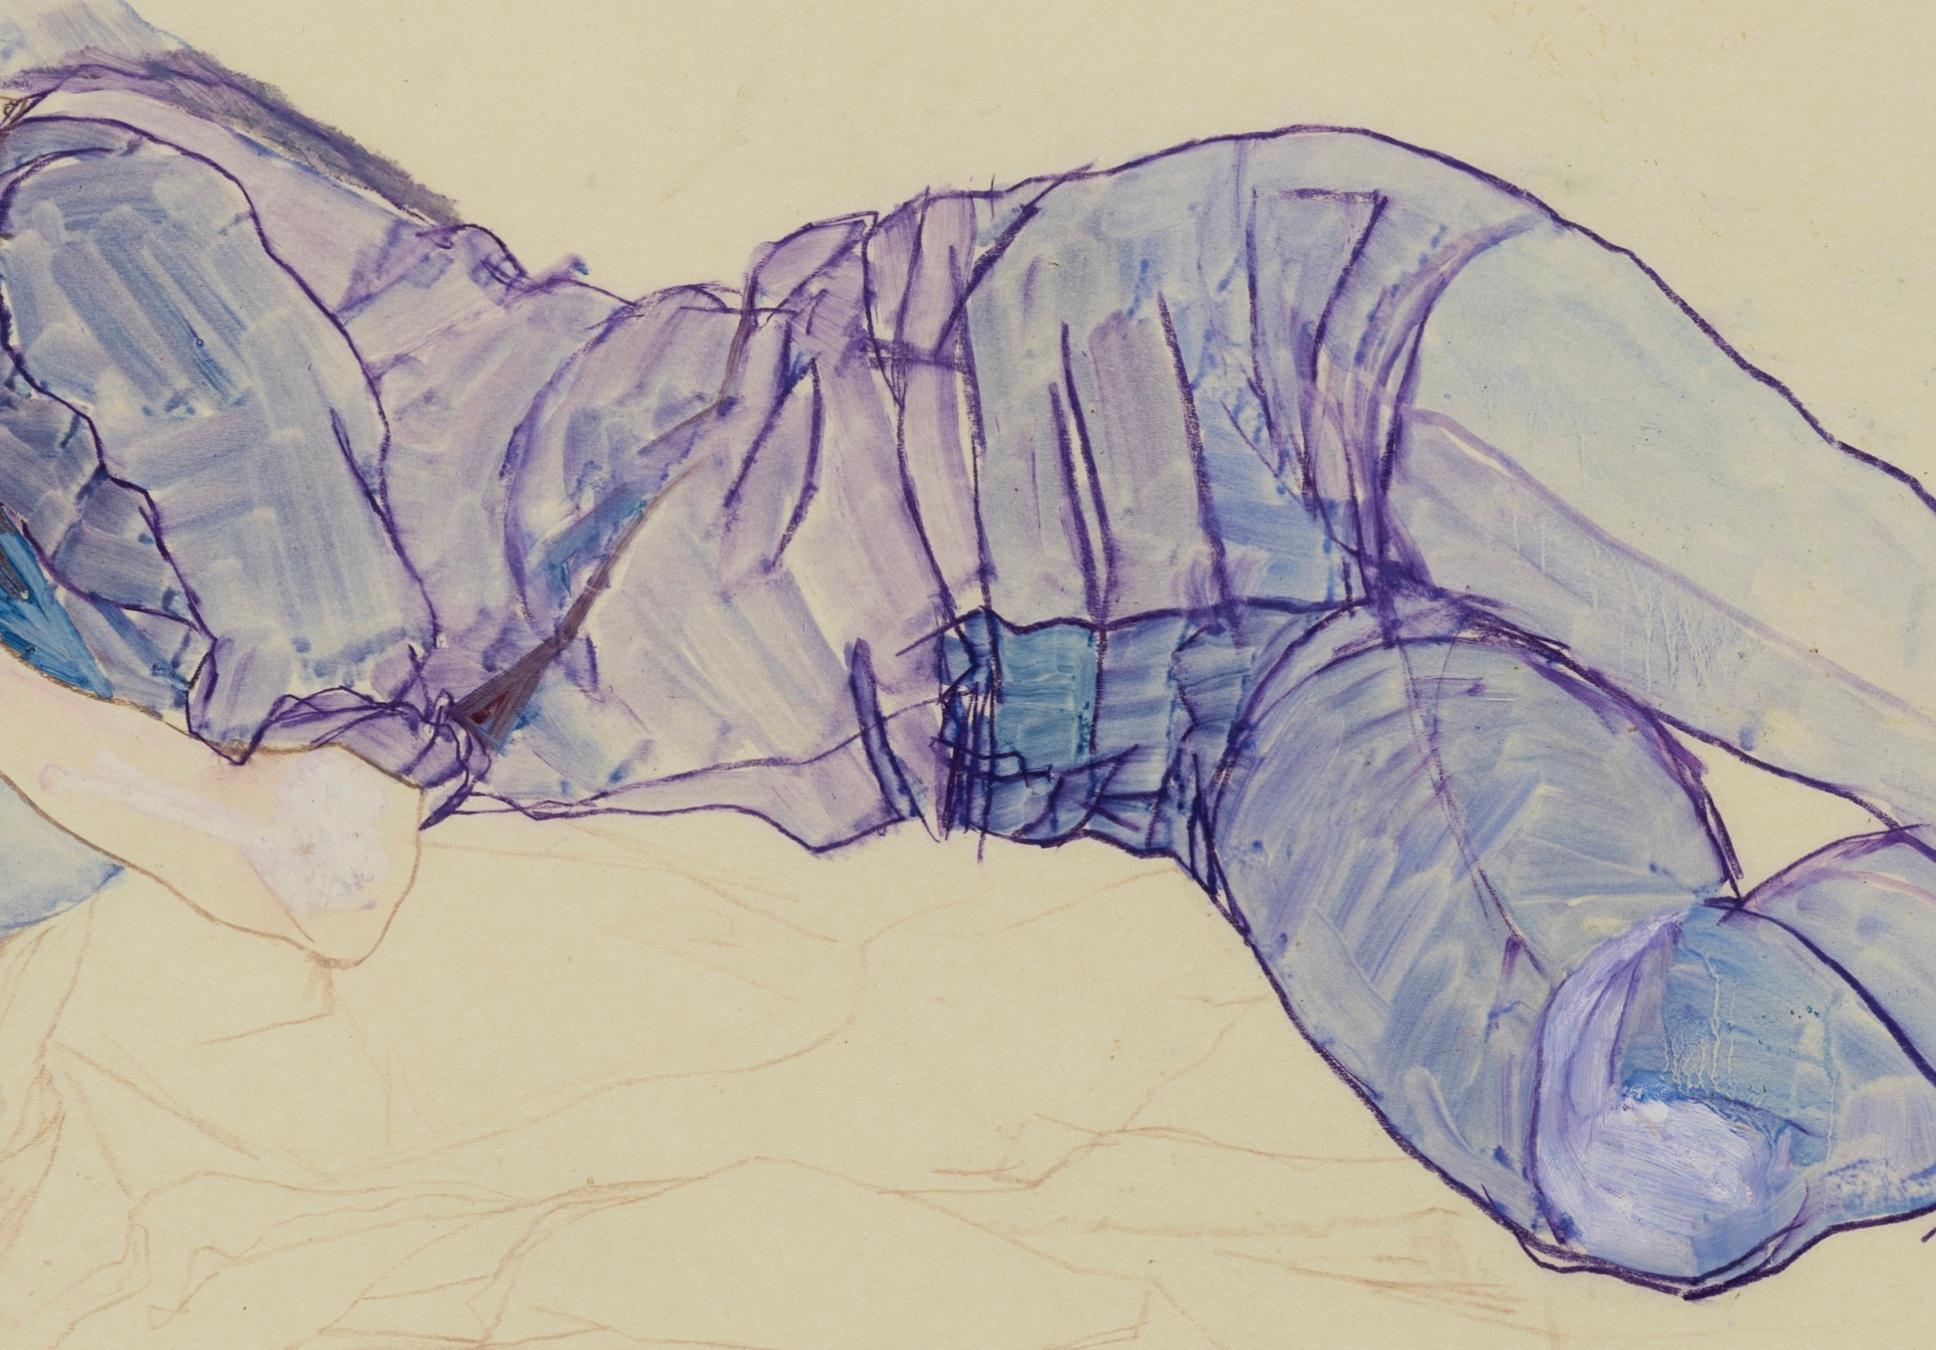 Josephine S. (Lying Down - Blues), Mixed media on Pergamenata parchment - Contemporary Art by Howard Tangye